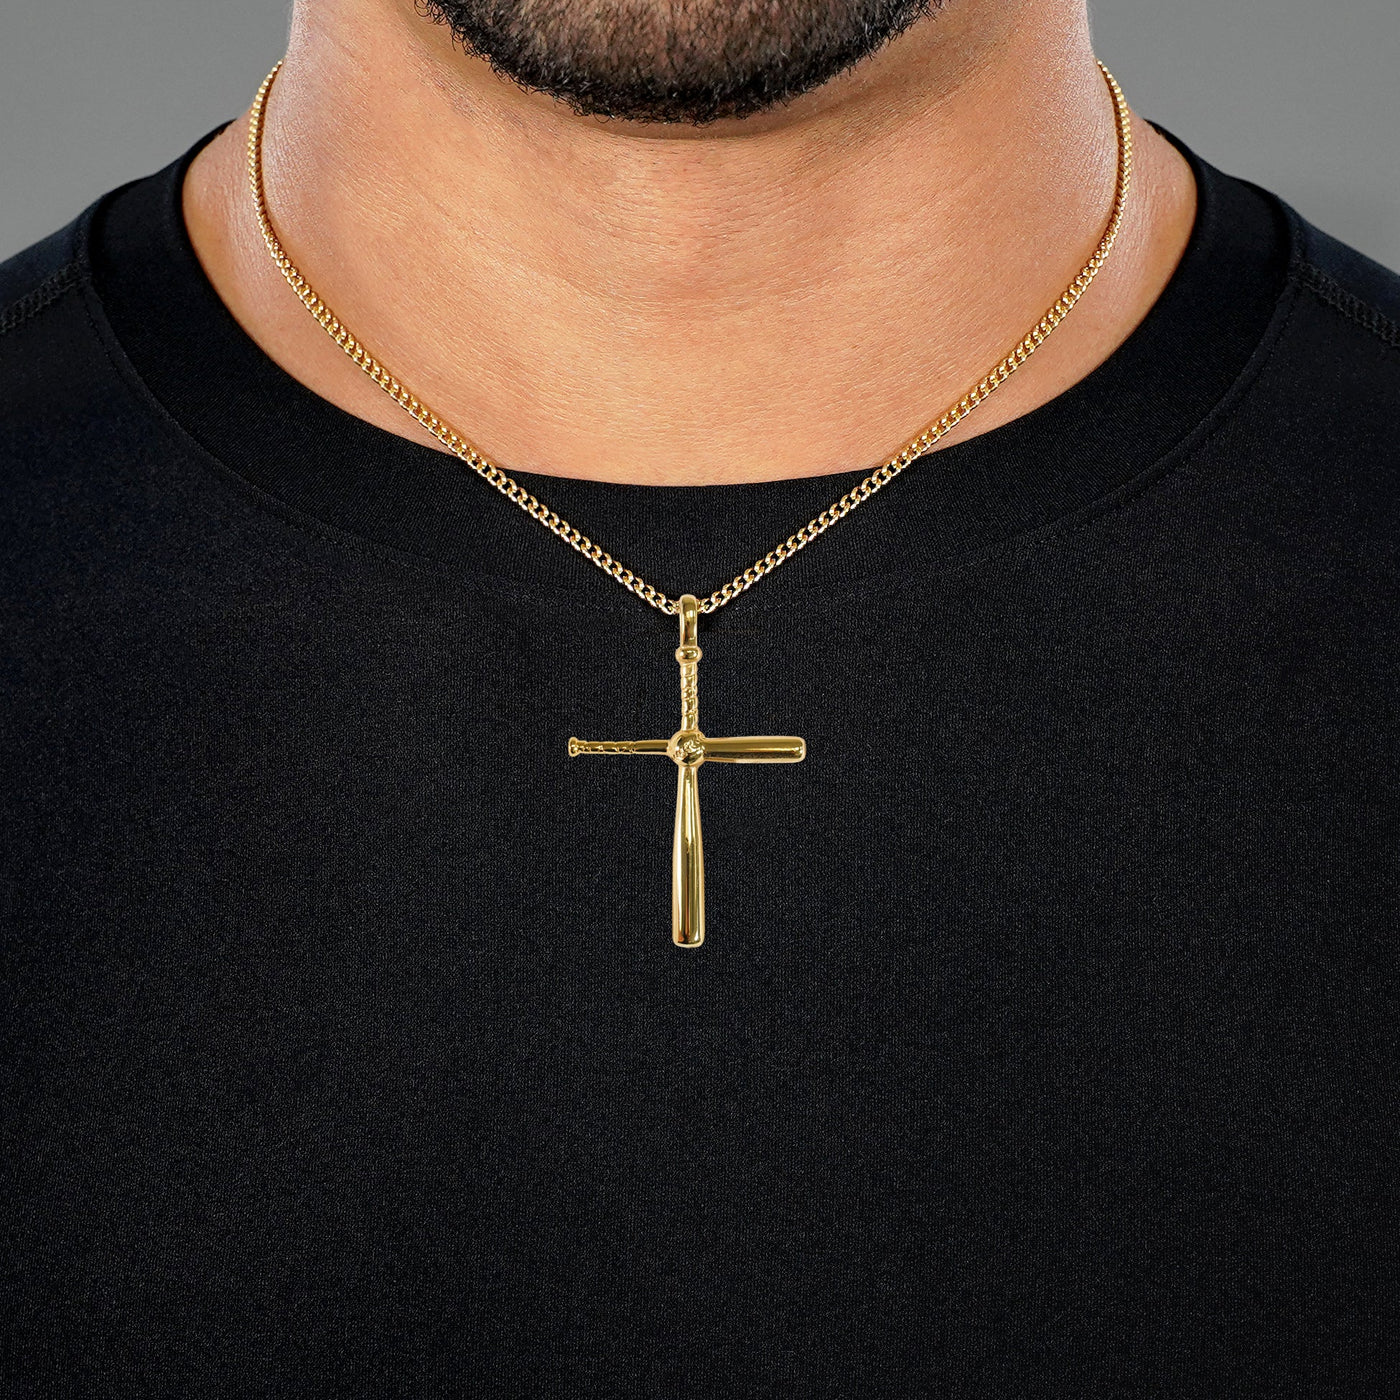 Baseball Bat Cross Pendant with Chain Kids Necklace - Gold Plated Stainless Steel